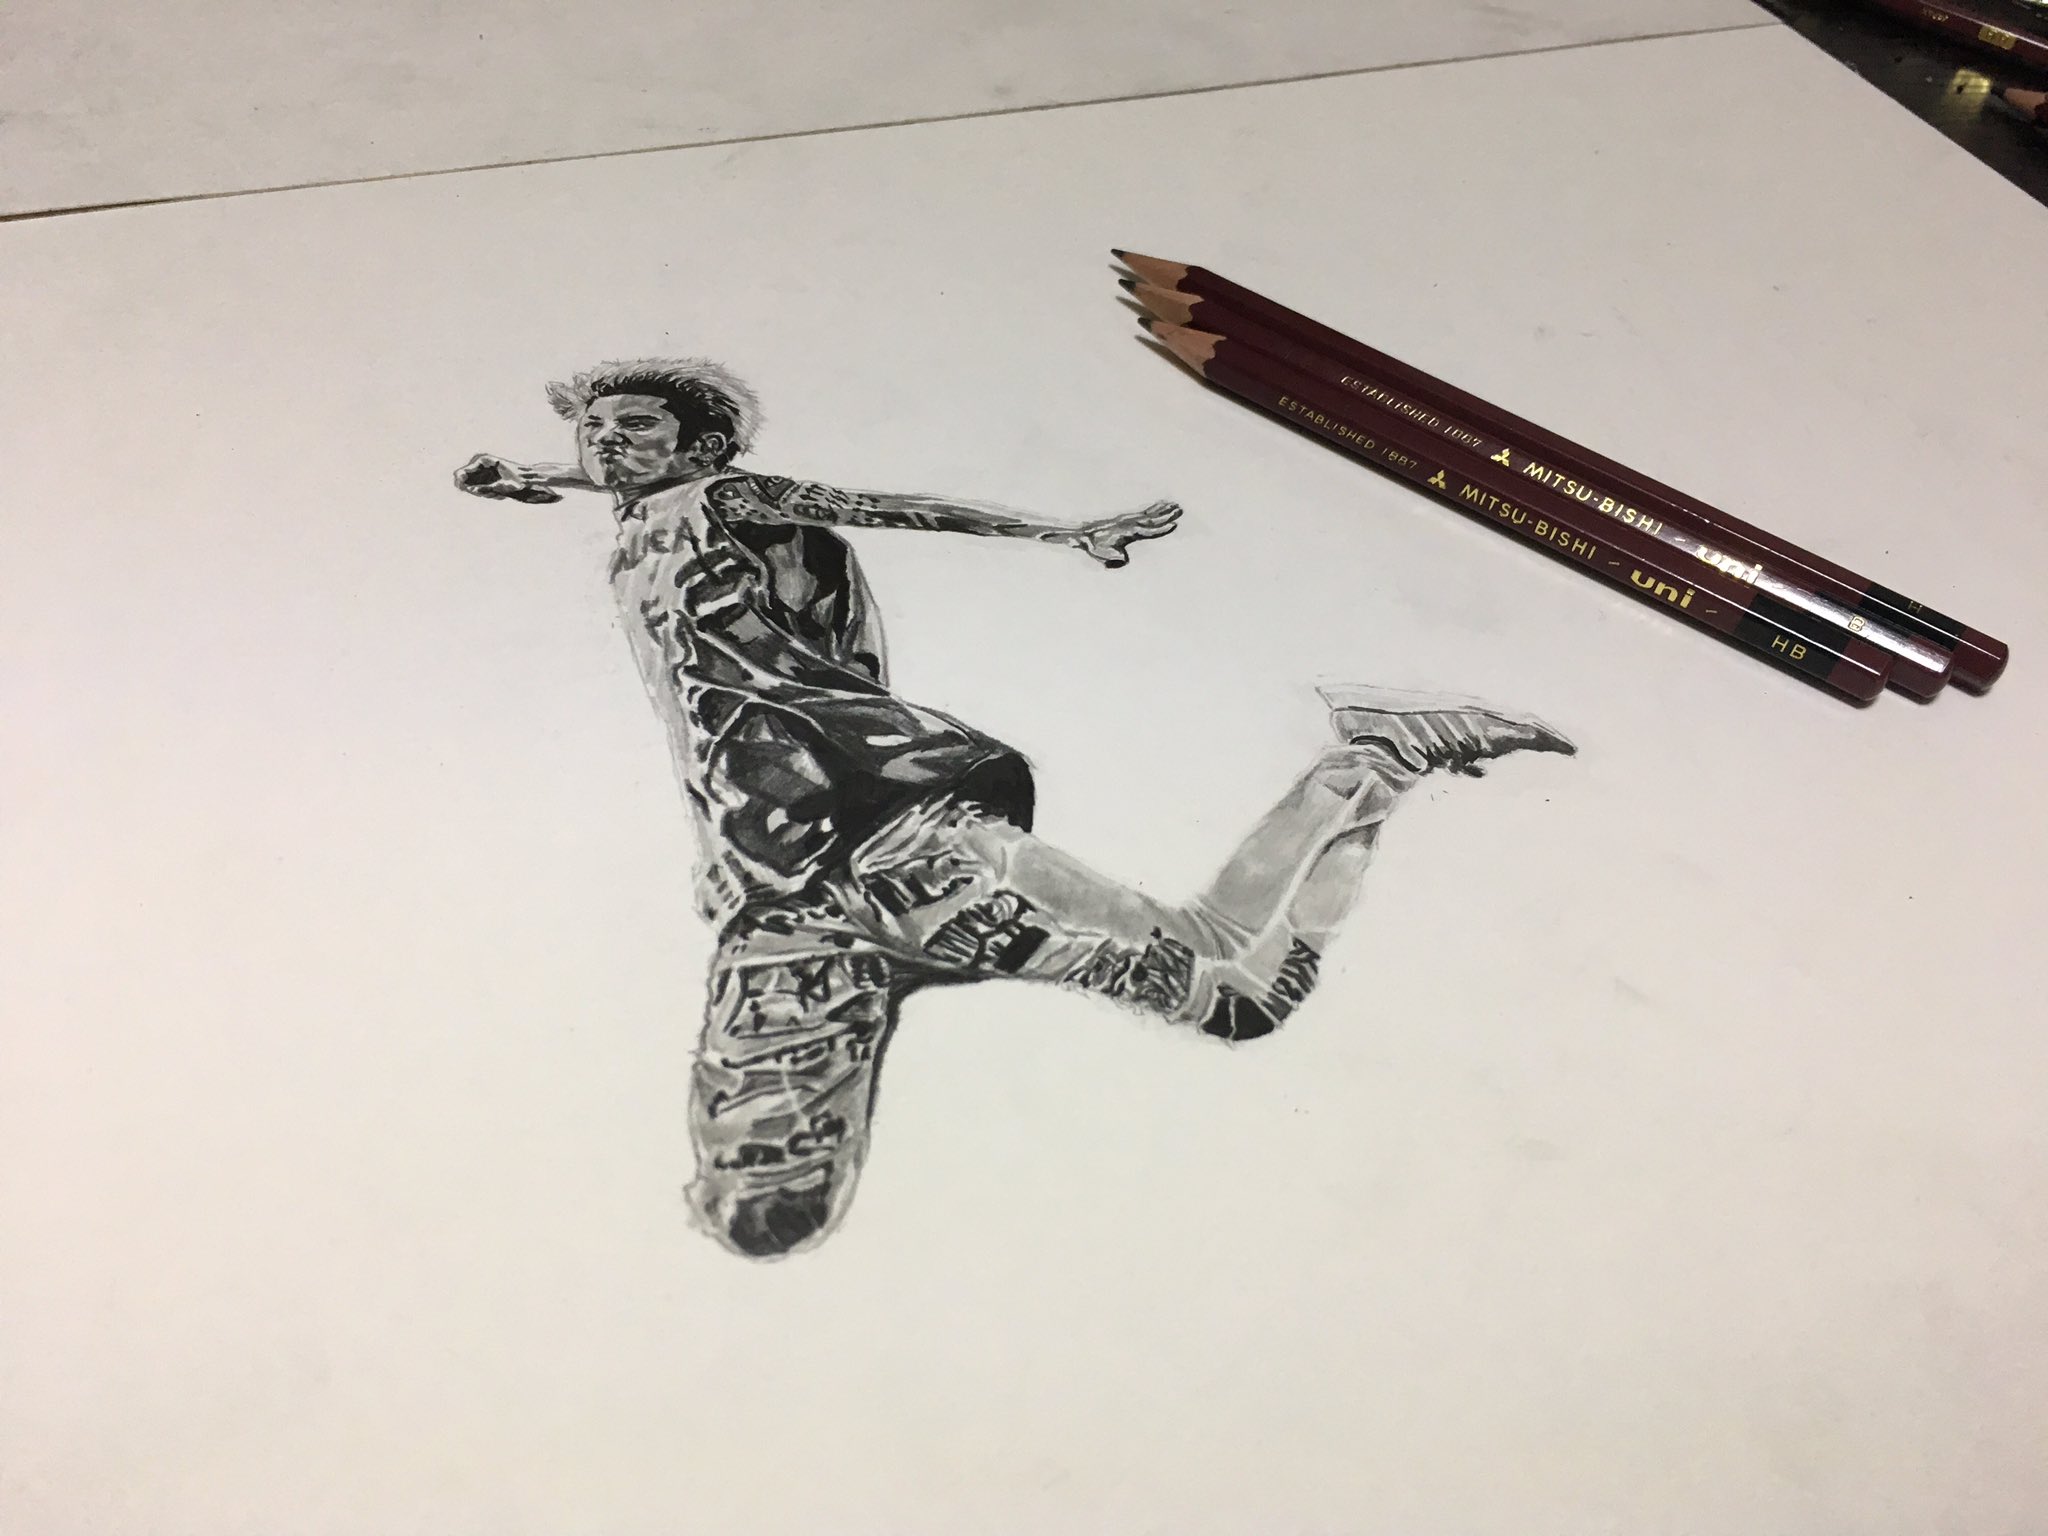 Yudai One Ok Rock Pencil Drawing Taka 次のイラスト描き始めました Oneokrcok Oneokrock ワンオク Taka Oorerさんrt Oorerさんたちと繋がりたい ワンオクイラスト部 ワンオクロック Drawing T Co Hqedefv4jz Twitter